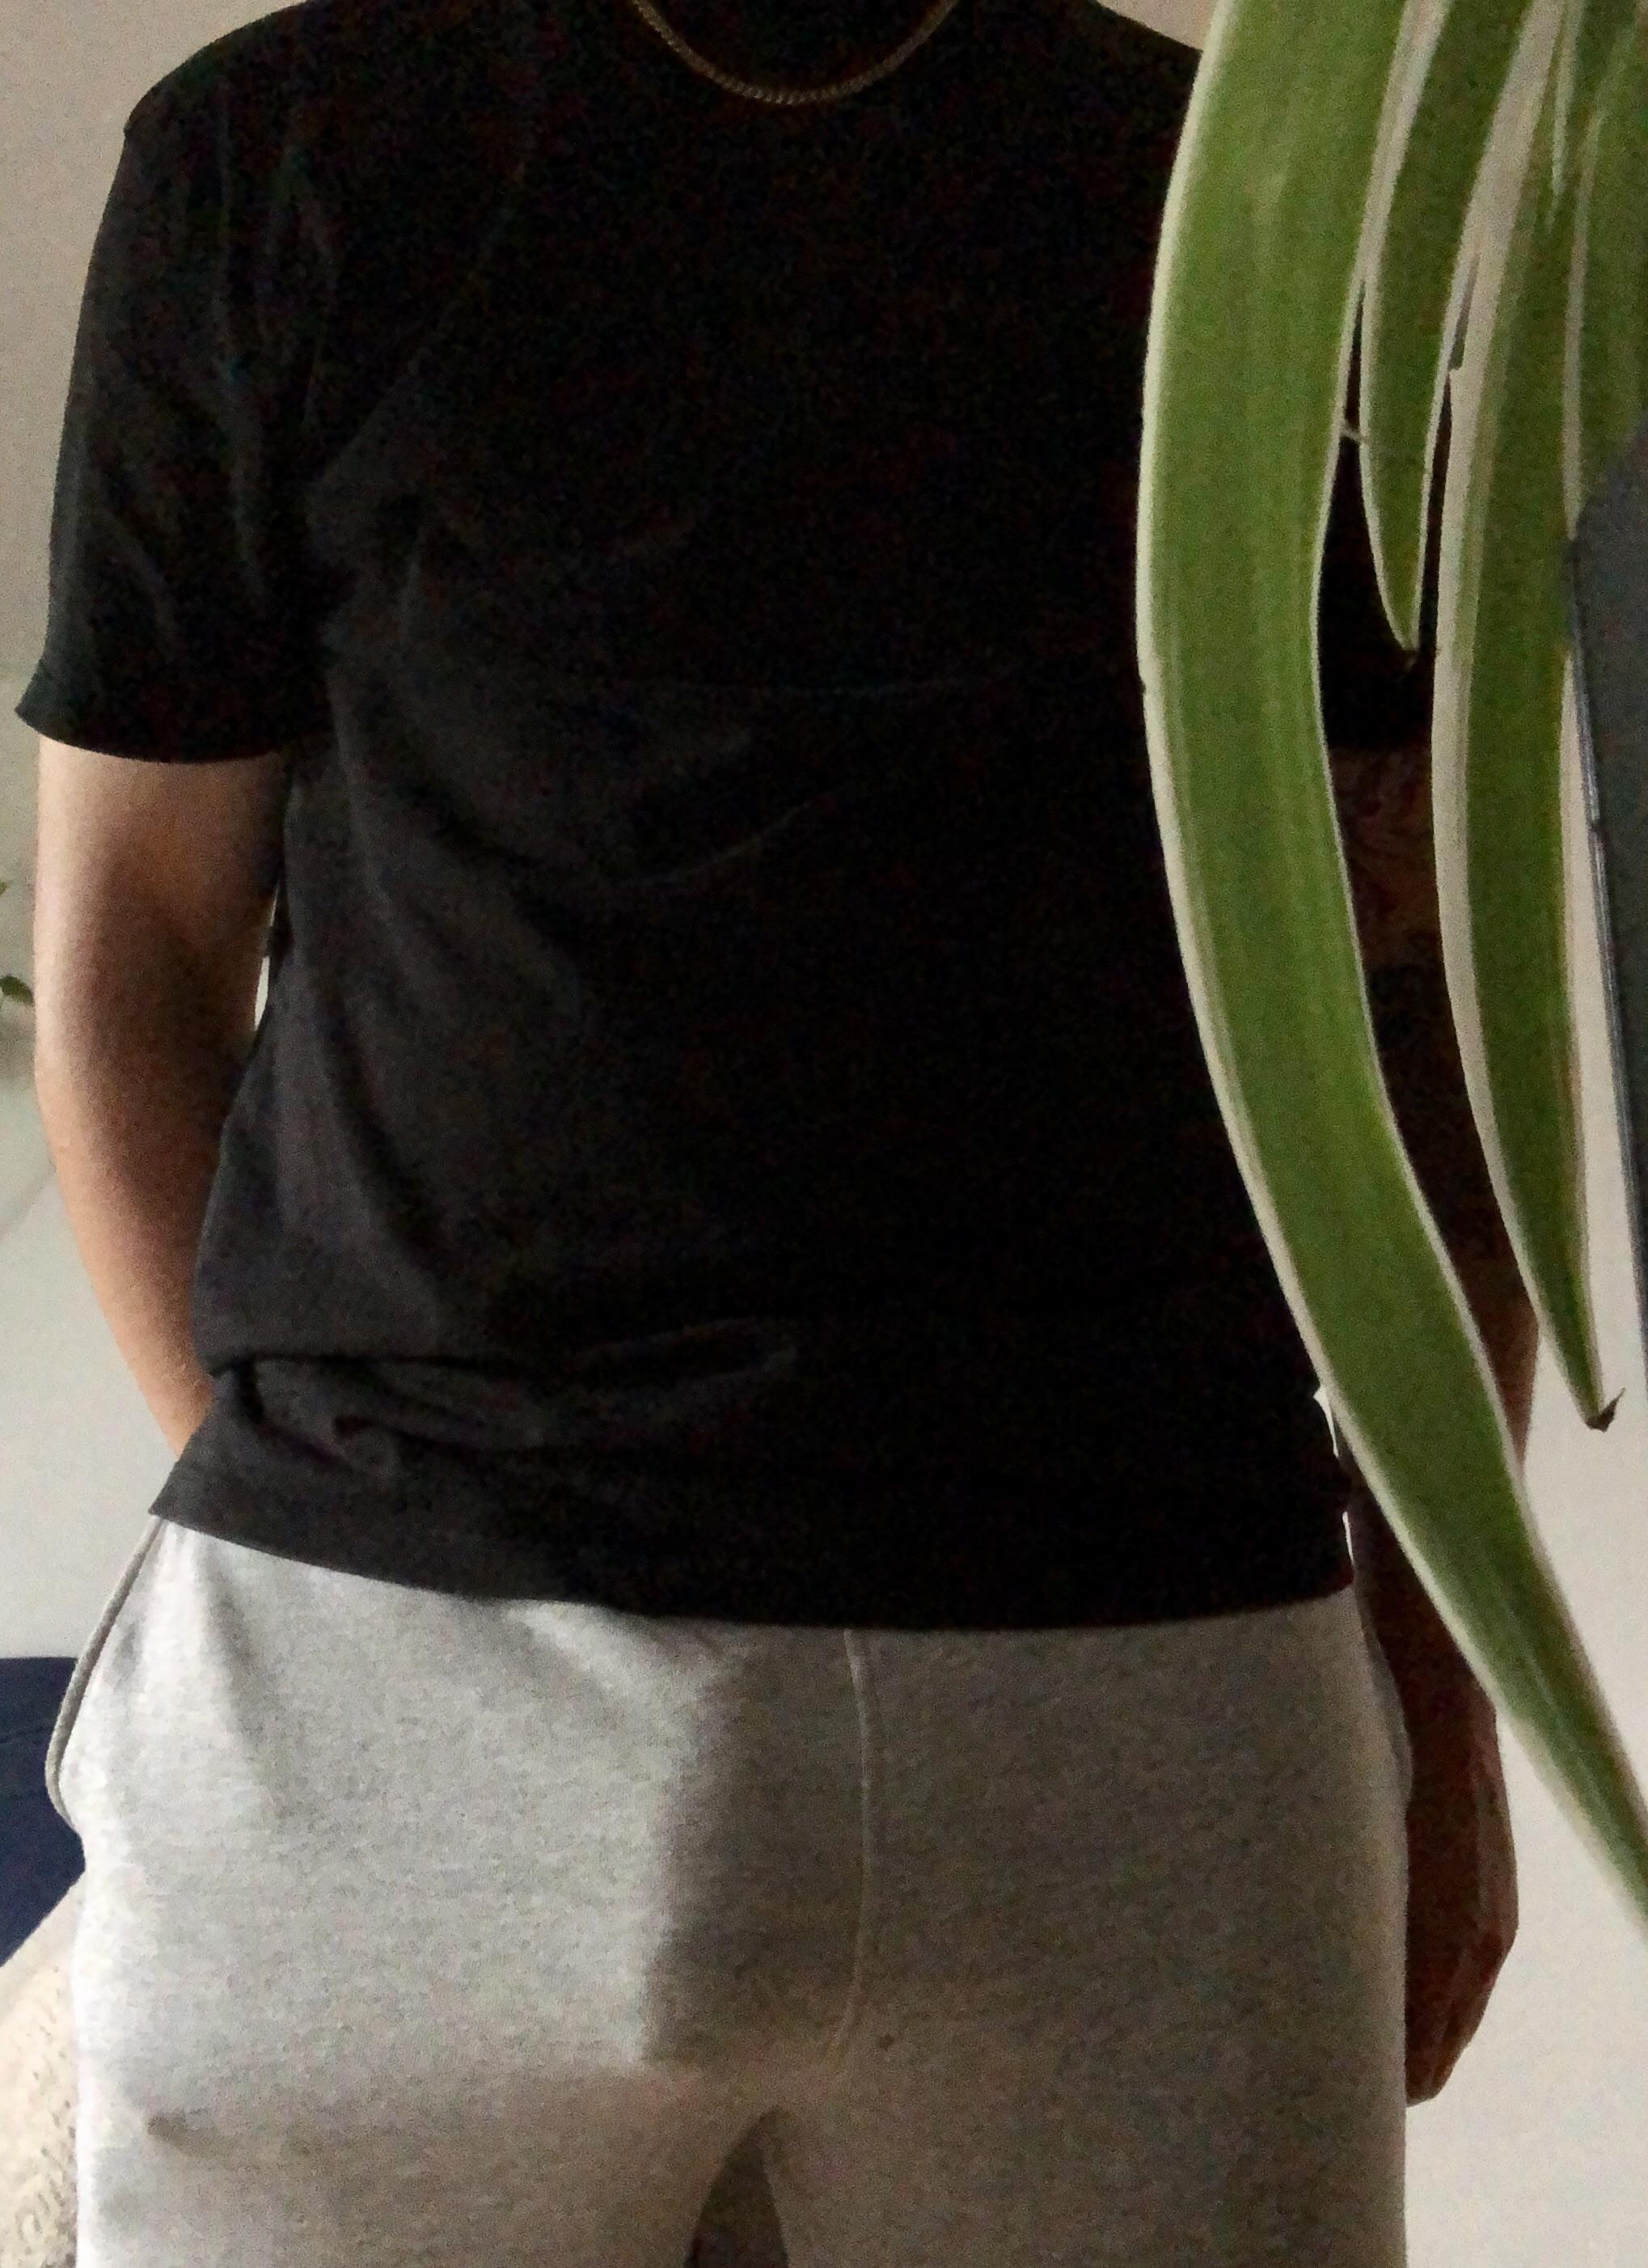 Heading out to run some errands in my grey sweatpants. Would you stare ...